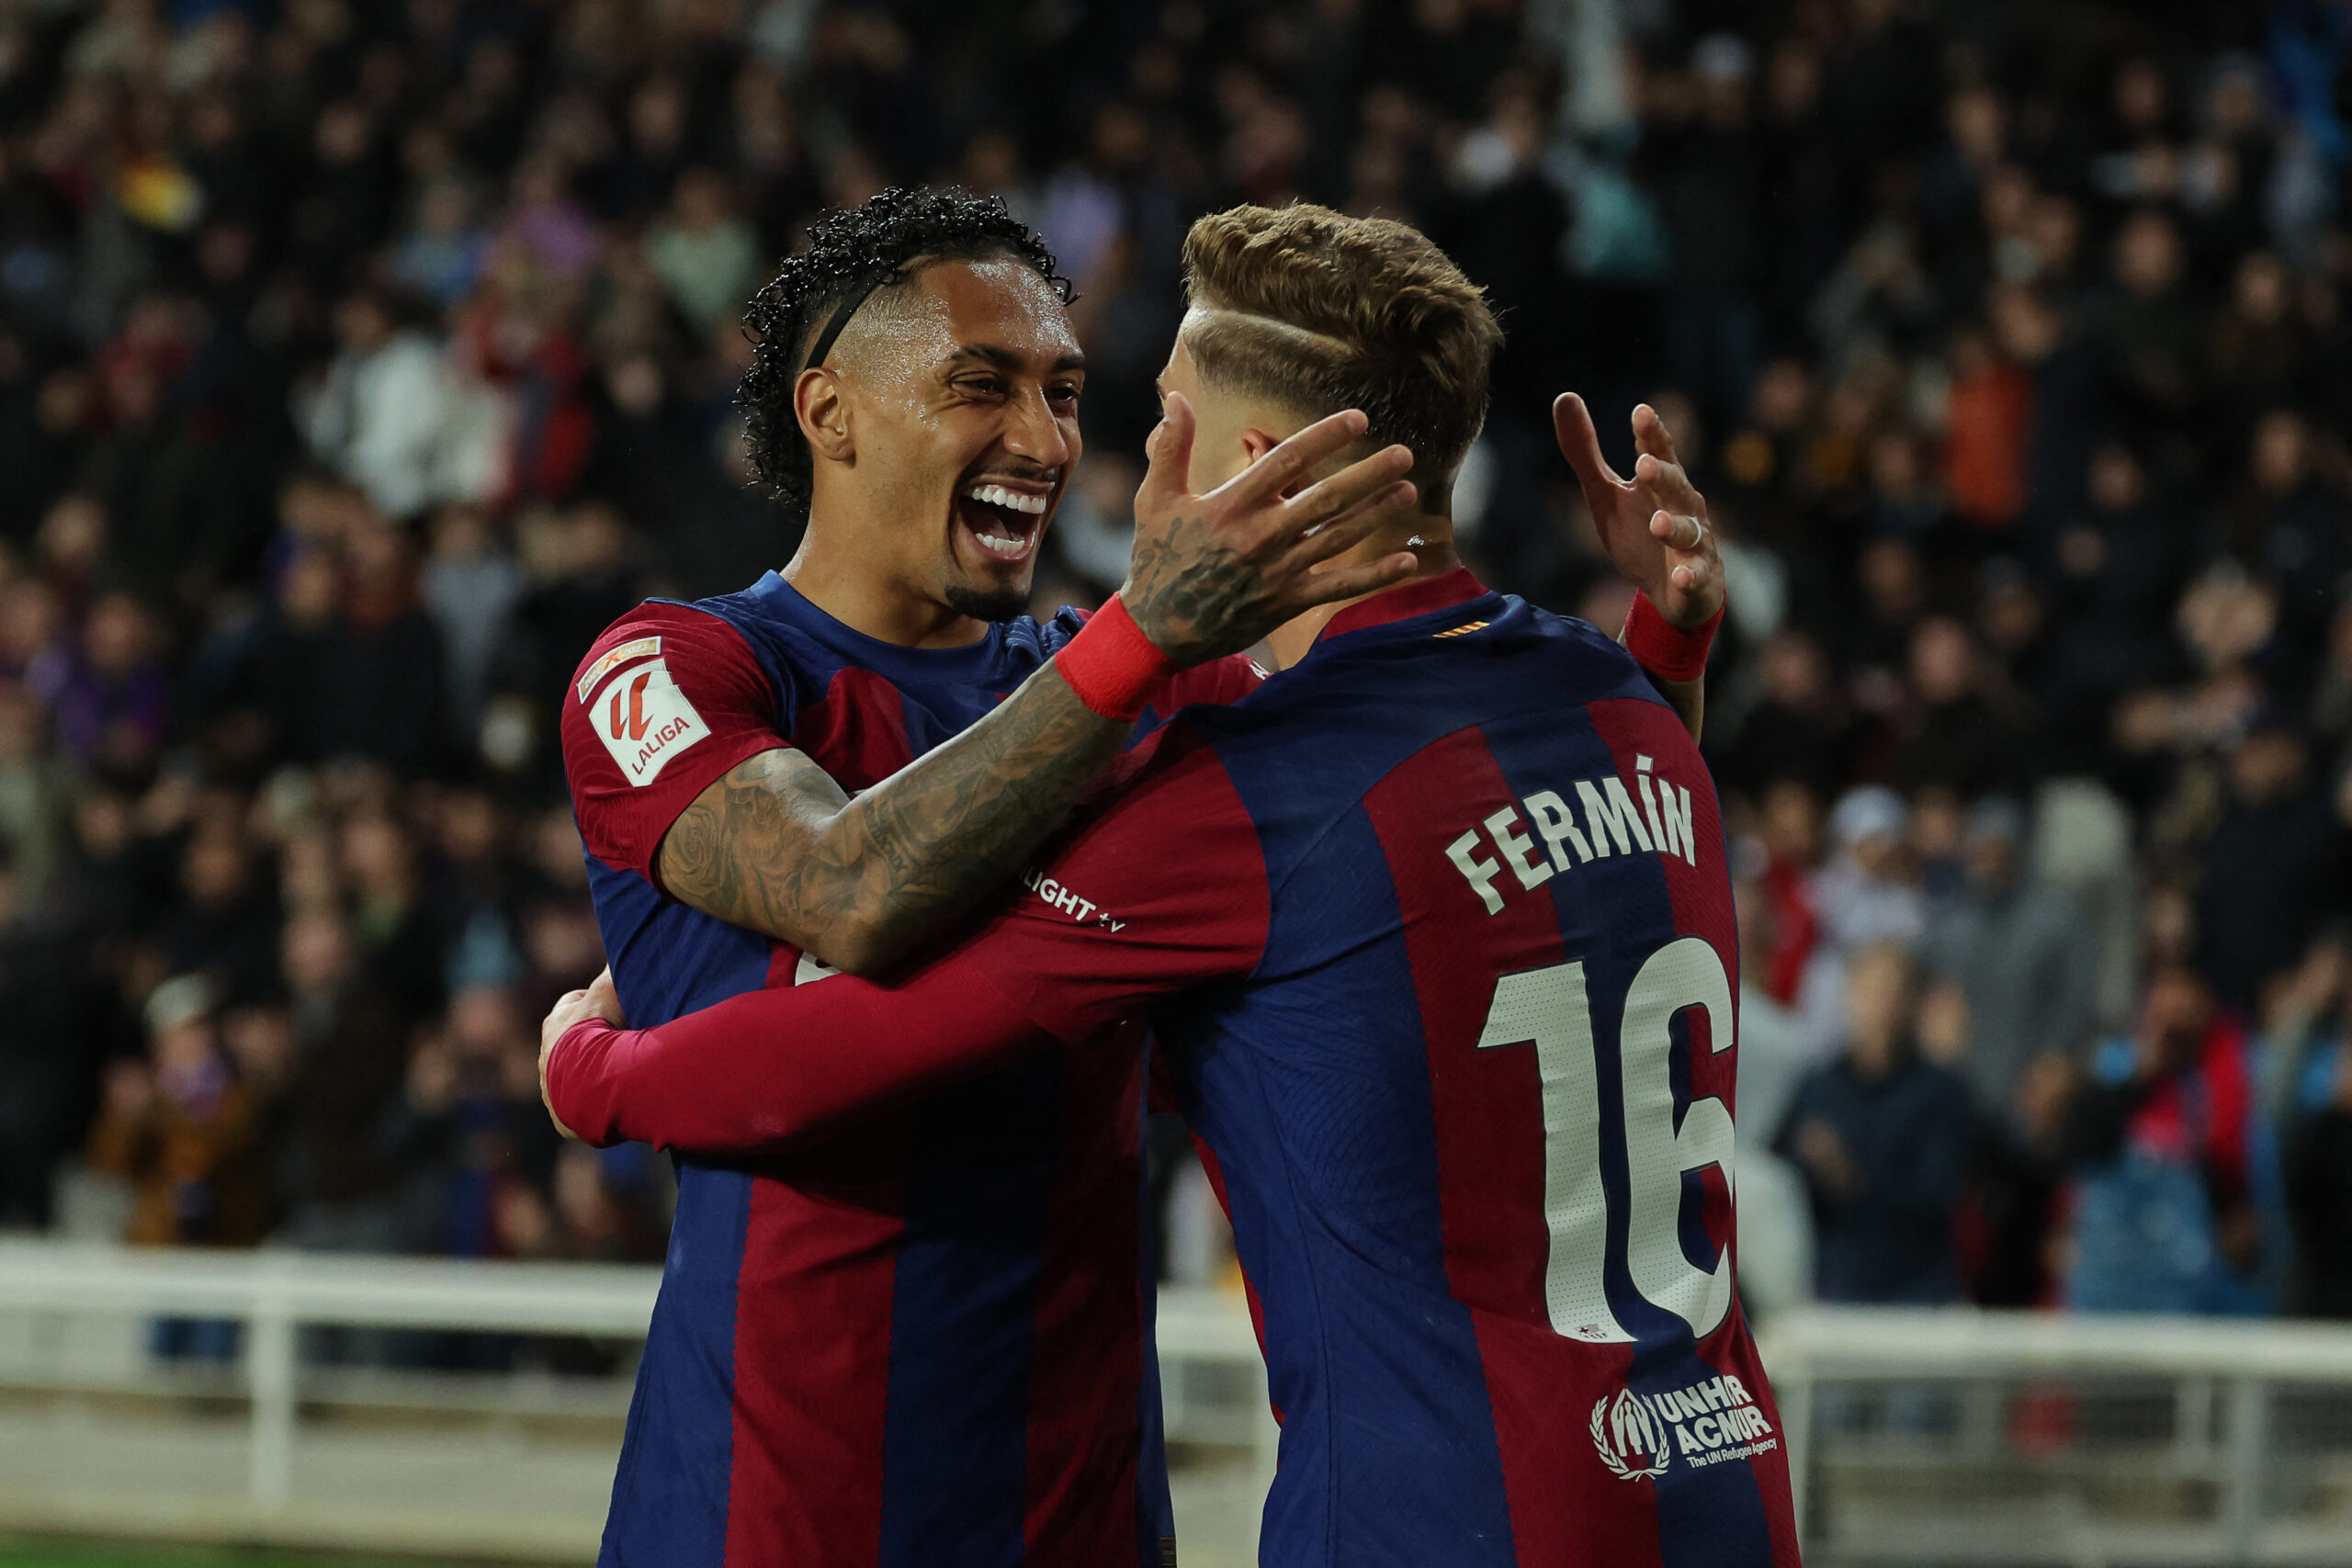 Barcelona's Spanish midfielder #16 Fermin Lopez celebrates with Barcelona's Brazilian forward #11 Raphinha after scoring his team's first goal during the Spanish league football match between FC Barcelona and Valencia CF at the Estadi Olimpic Lluis Companys in Barcelona on April 29, 2024.